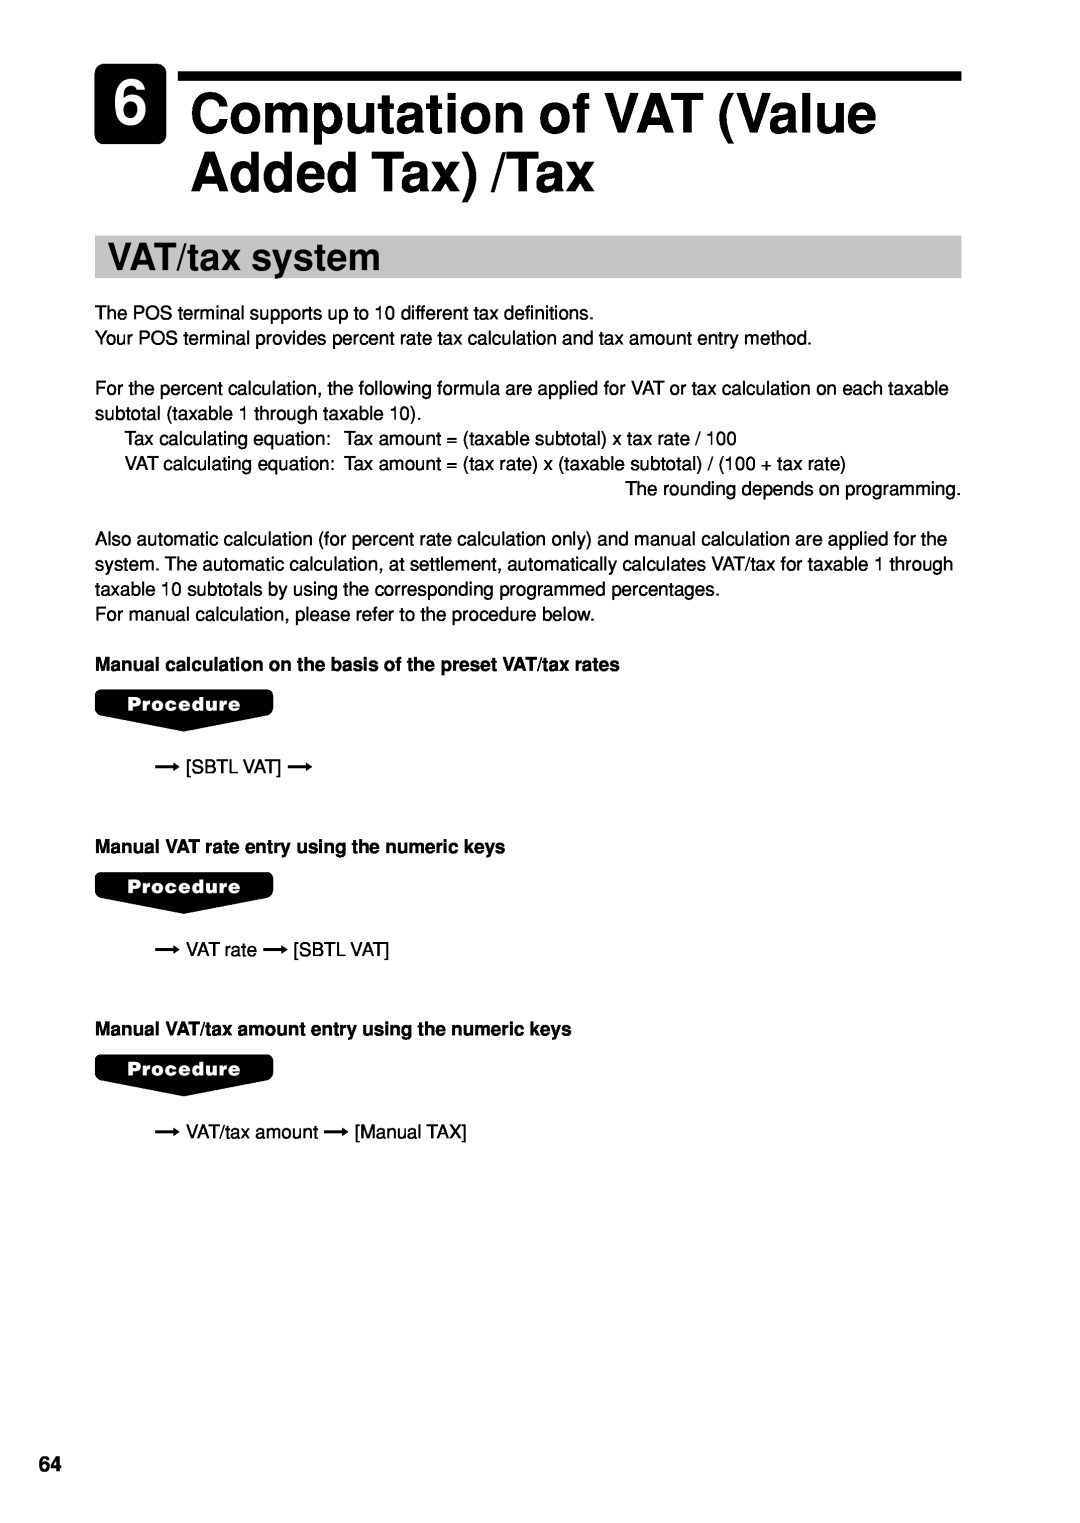 Sharp UP-X300 6Computation of VAT Value Added Tax /Tax, VAT/tax system, Manual VAT rate entry using the numeric keys 